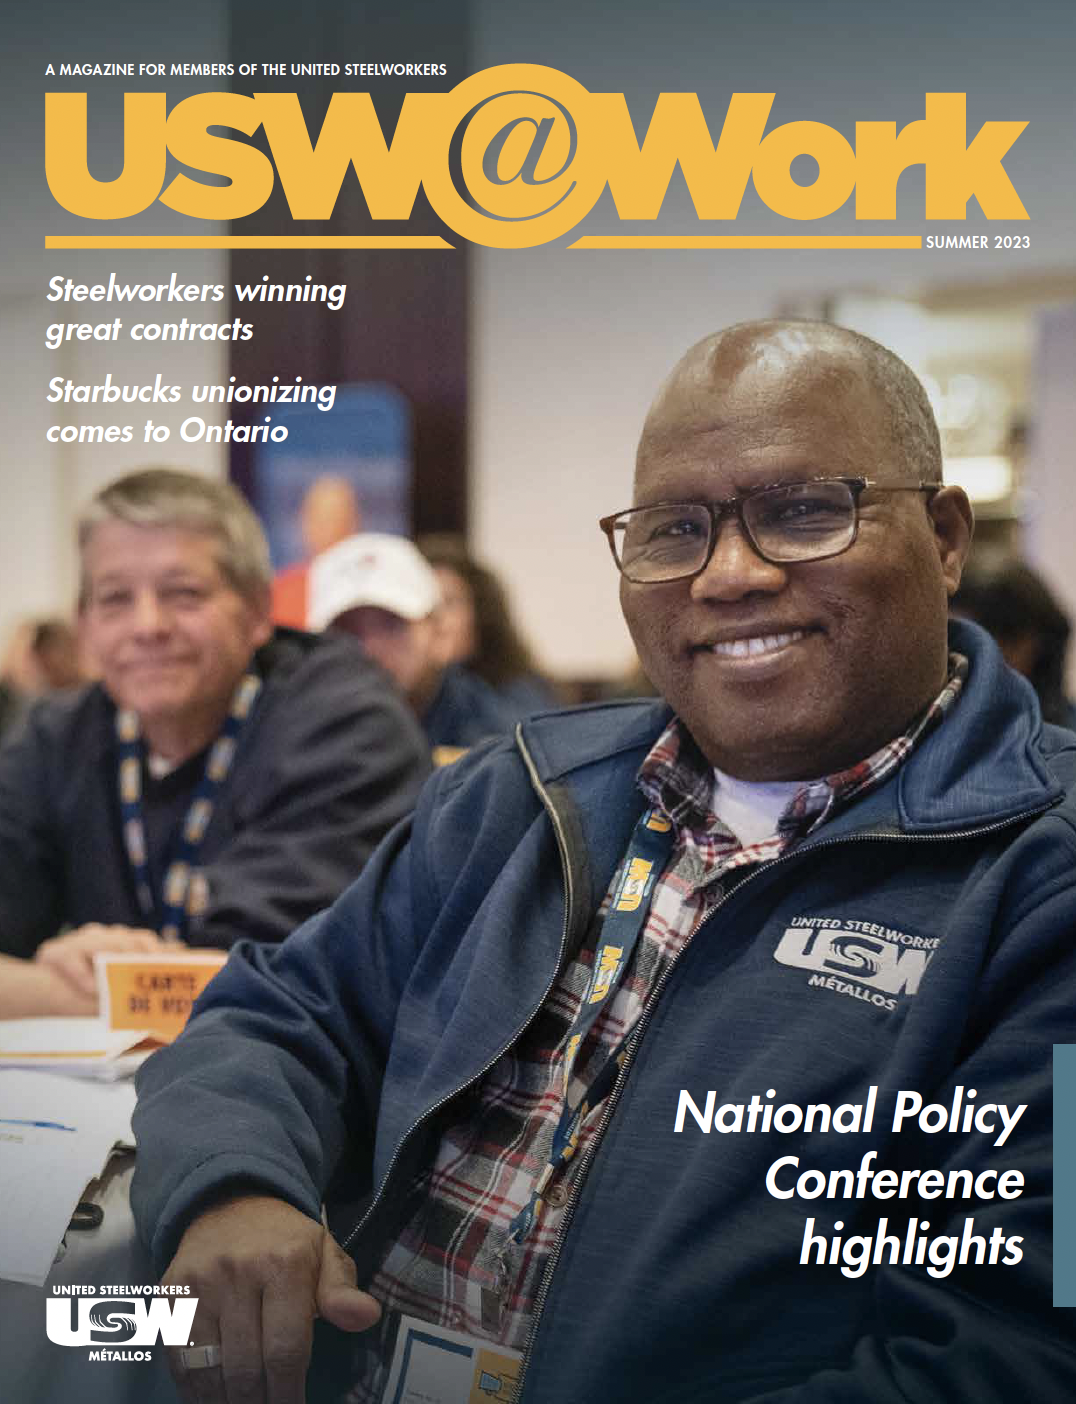 Image: cover of a magazine featuring a smiling black man who is seated at a union event in the foreground. He is wearing a USW jacket and smiling. Behind him in the background is a white man also with a USW jacket, also seated at the table. They are in a large ballroom with many other attendees.